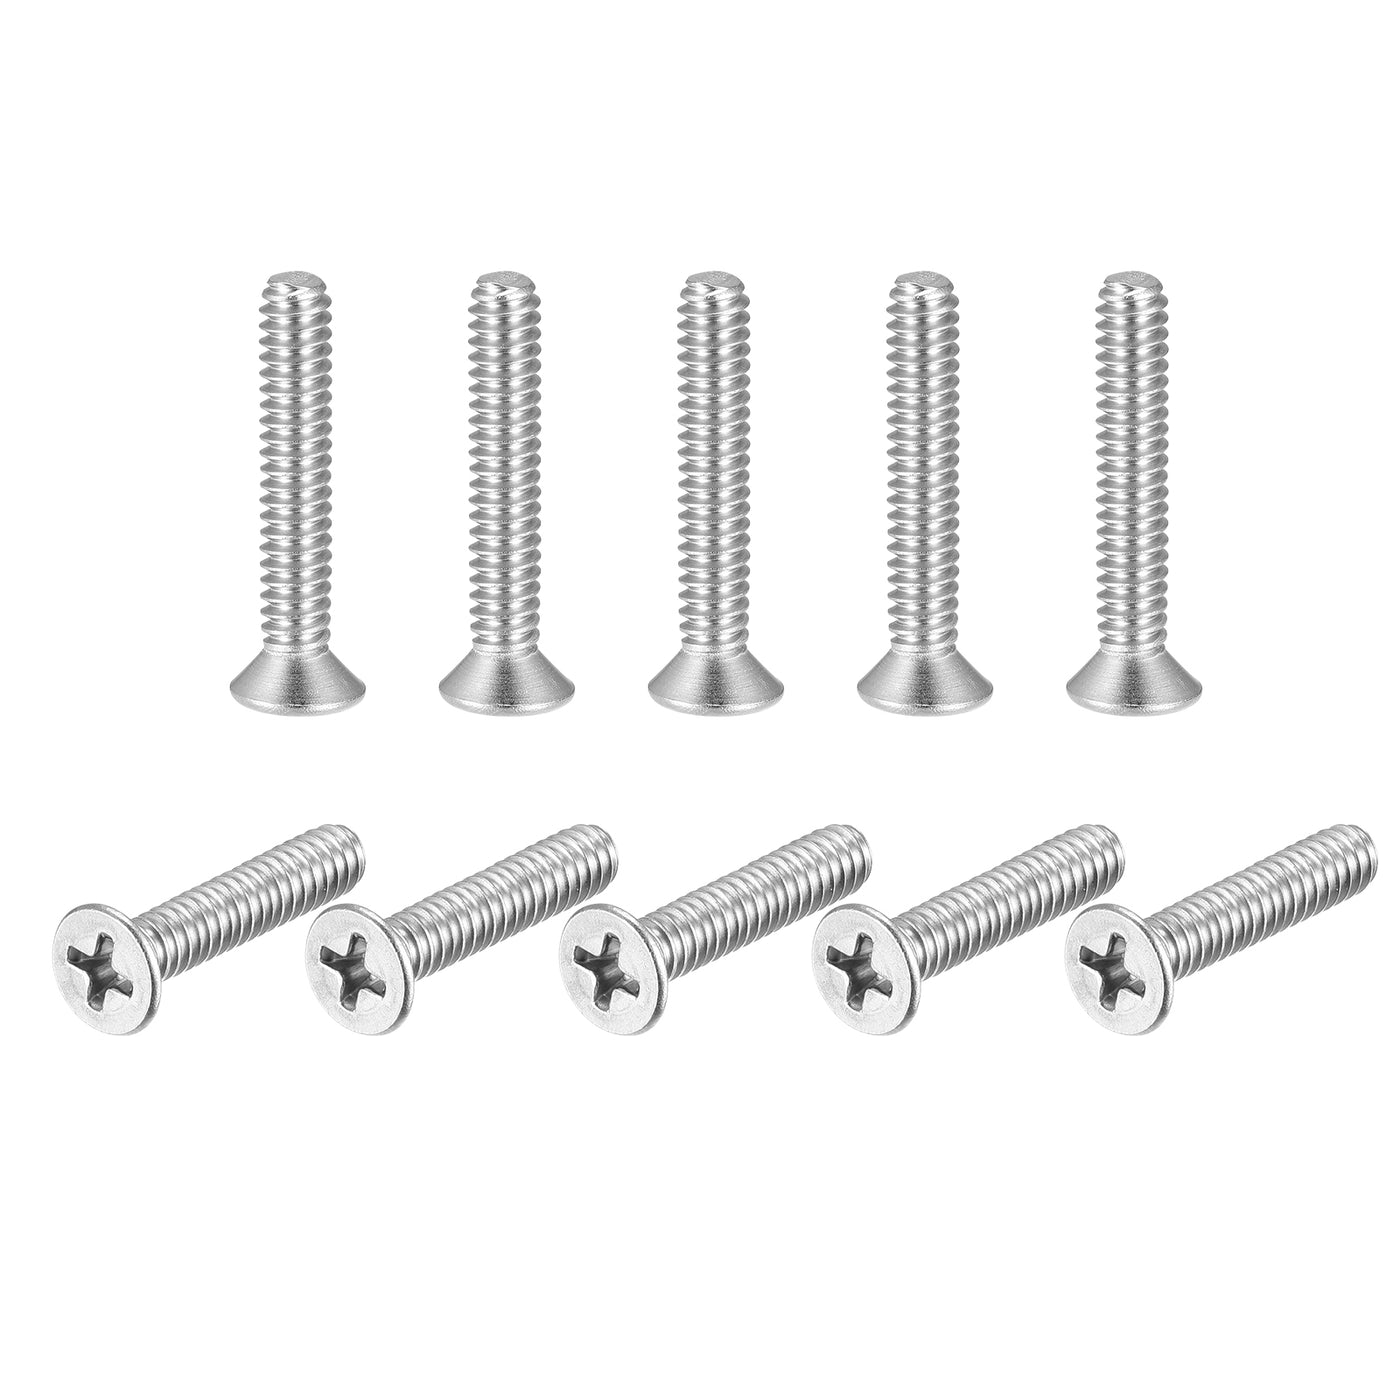 uxcell Uxcell 10#-24x1" Flat Head Machine Screws Phillips 304 Stainless Steel Bolts 25pcs